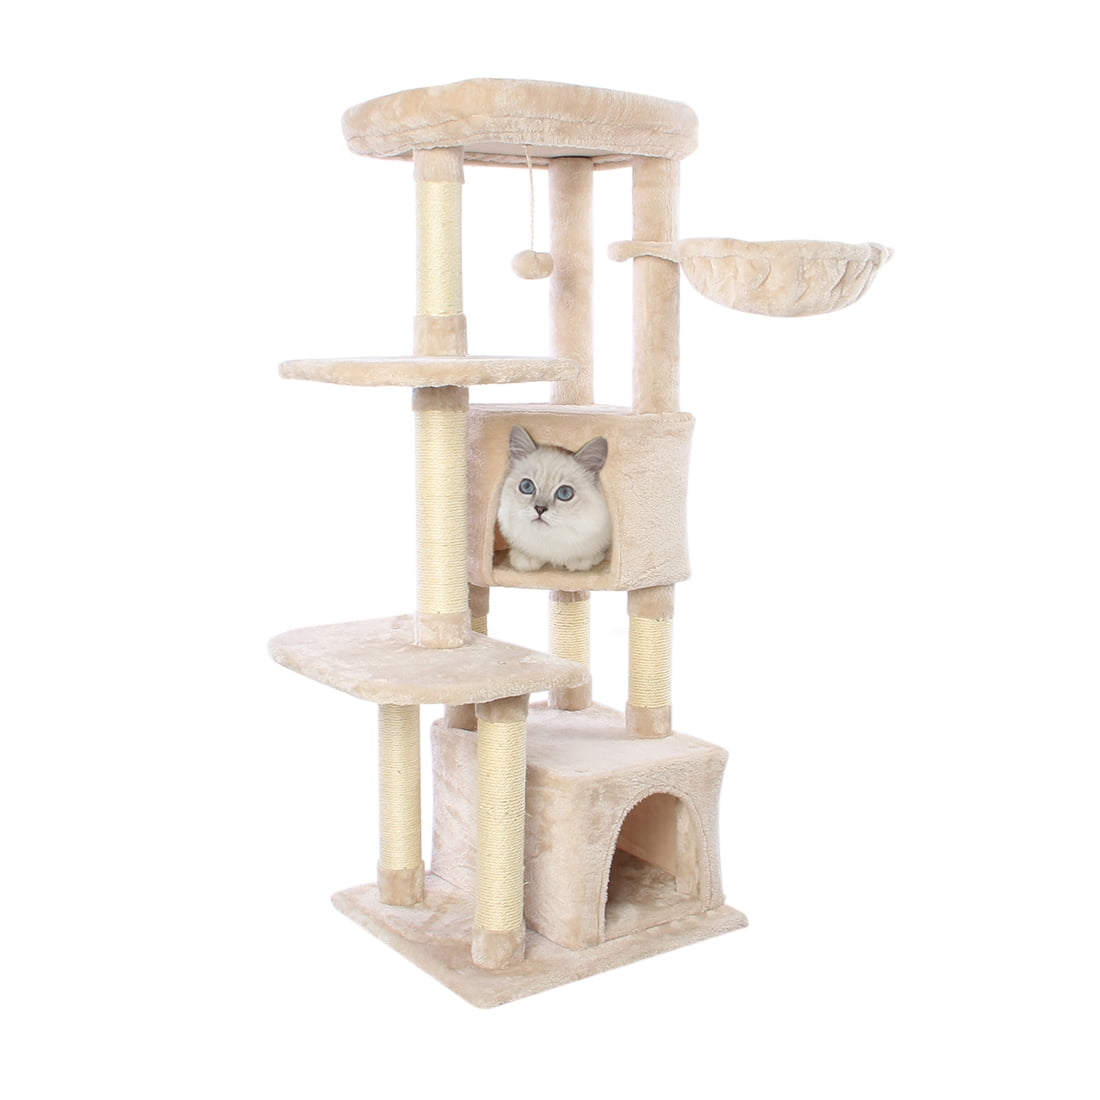 CUPETS Pet Products Cat Tree House with Scratching Post for Kittens and Cat,Activity Tree 